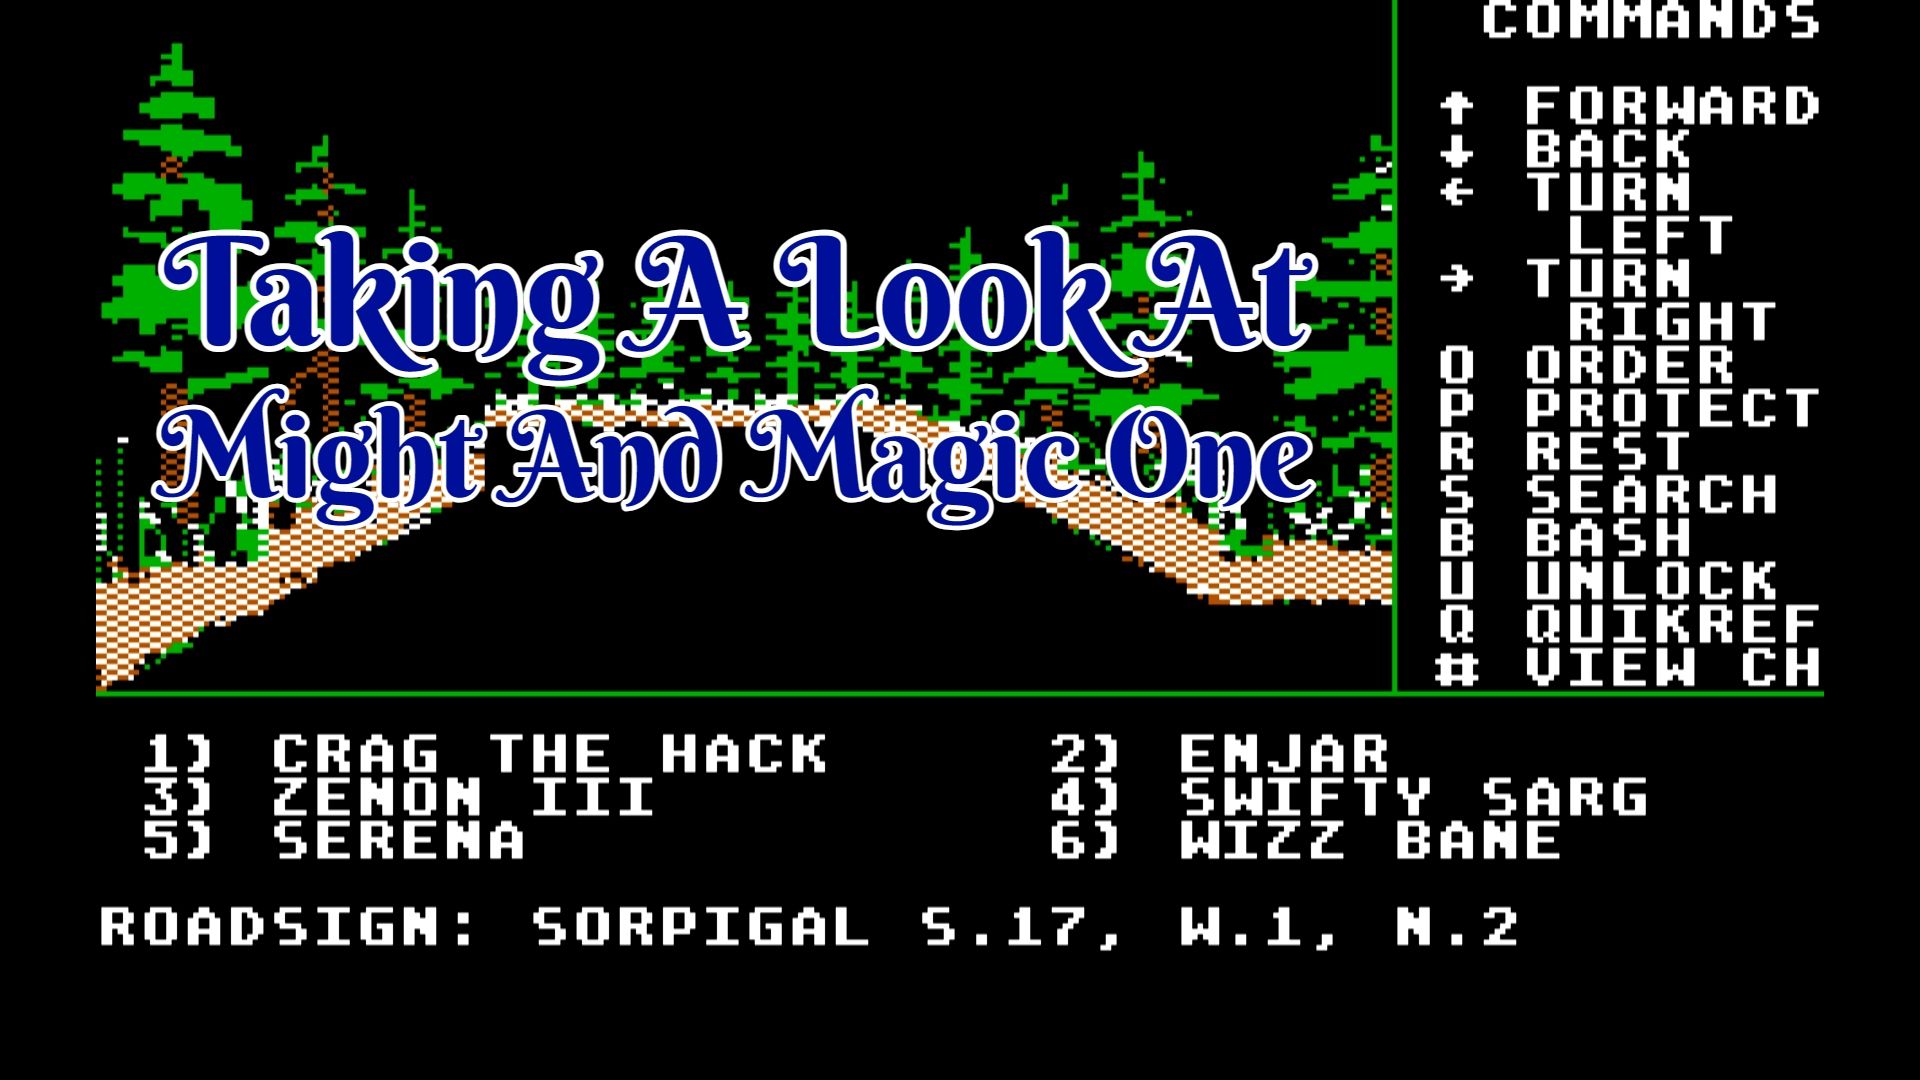 Taking A Look at Might And Magic One inner.jpg